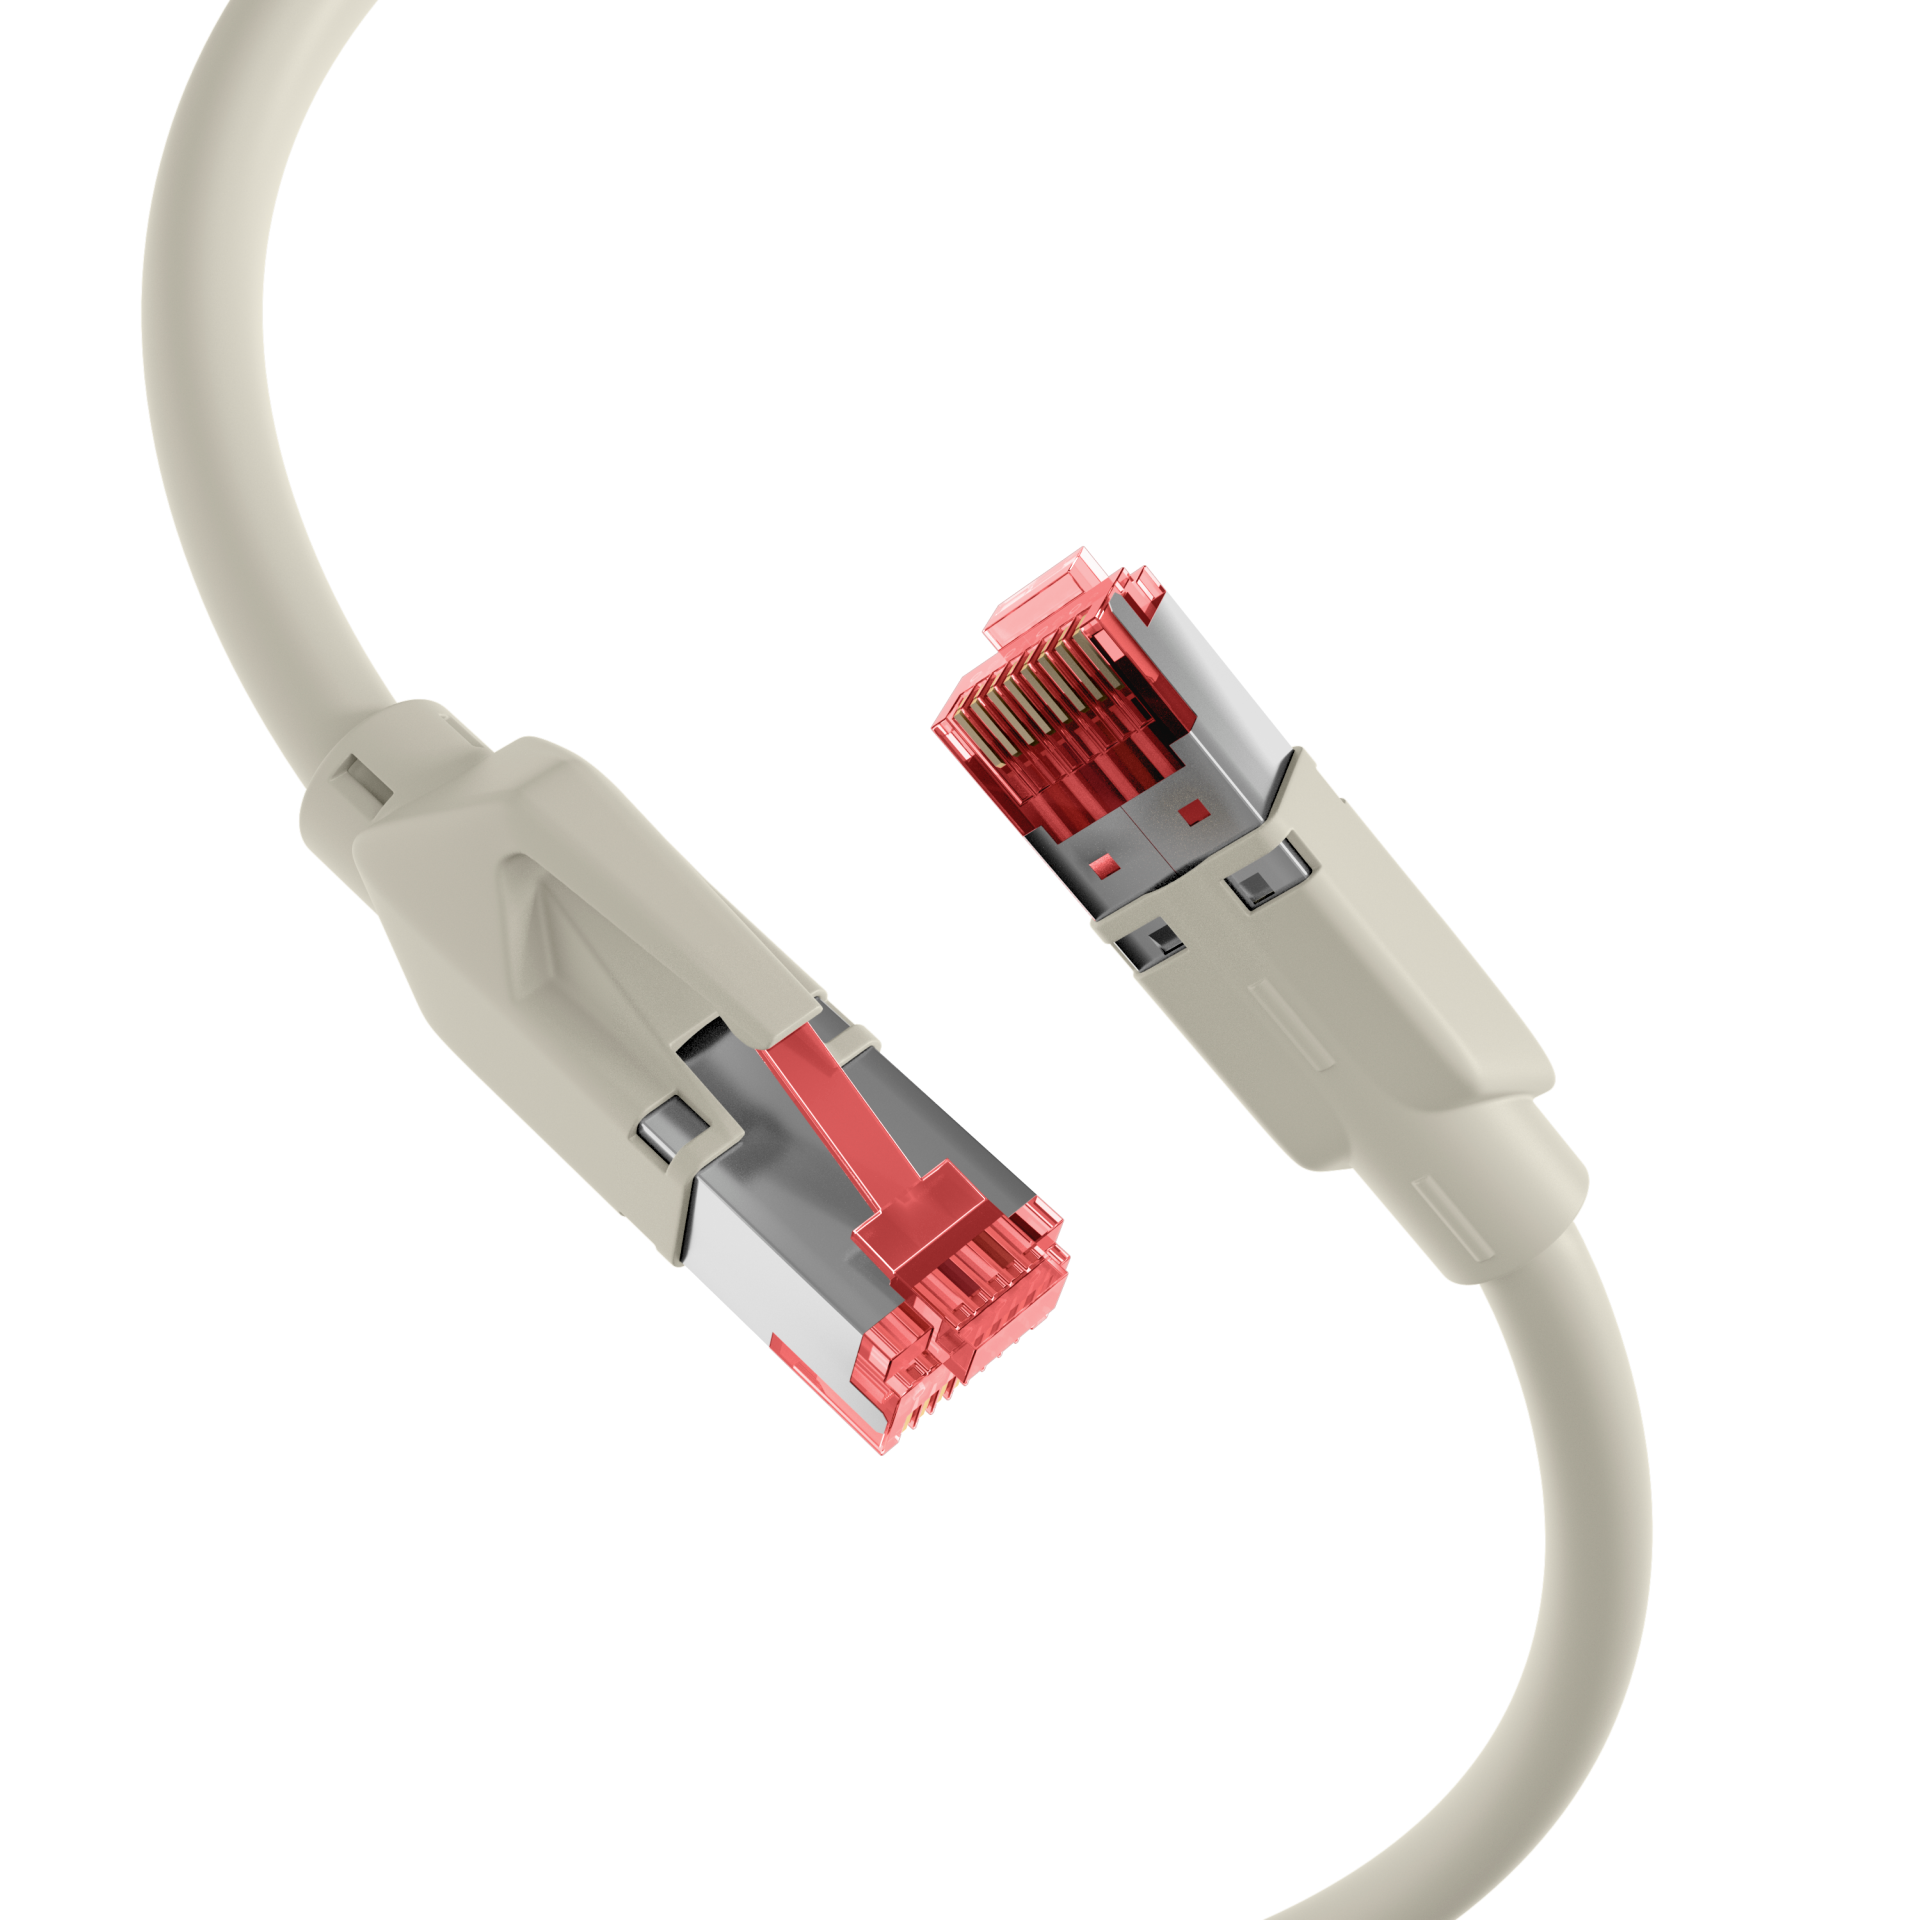 RJ45 Crossover Patch cable S/FTP, Cat.6, TM21, UC900, 3m, grey